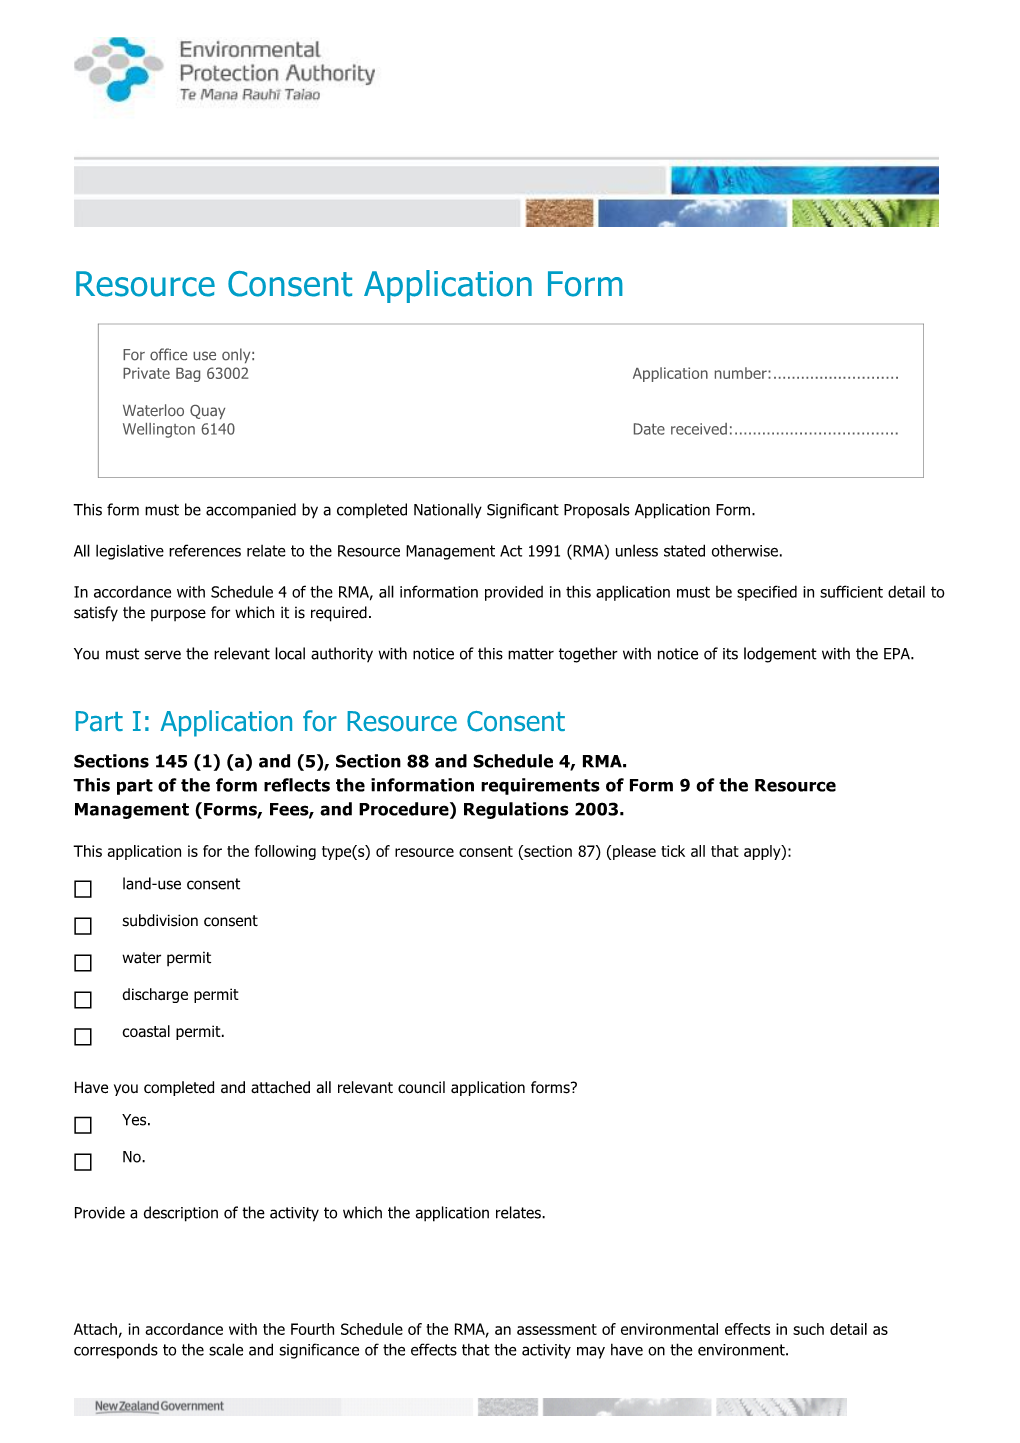 Resource Consent Form NSP